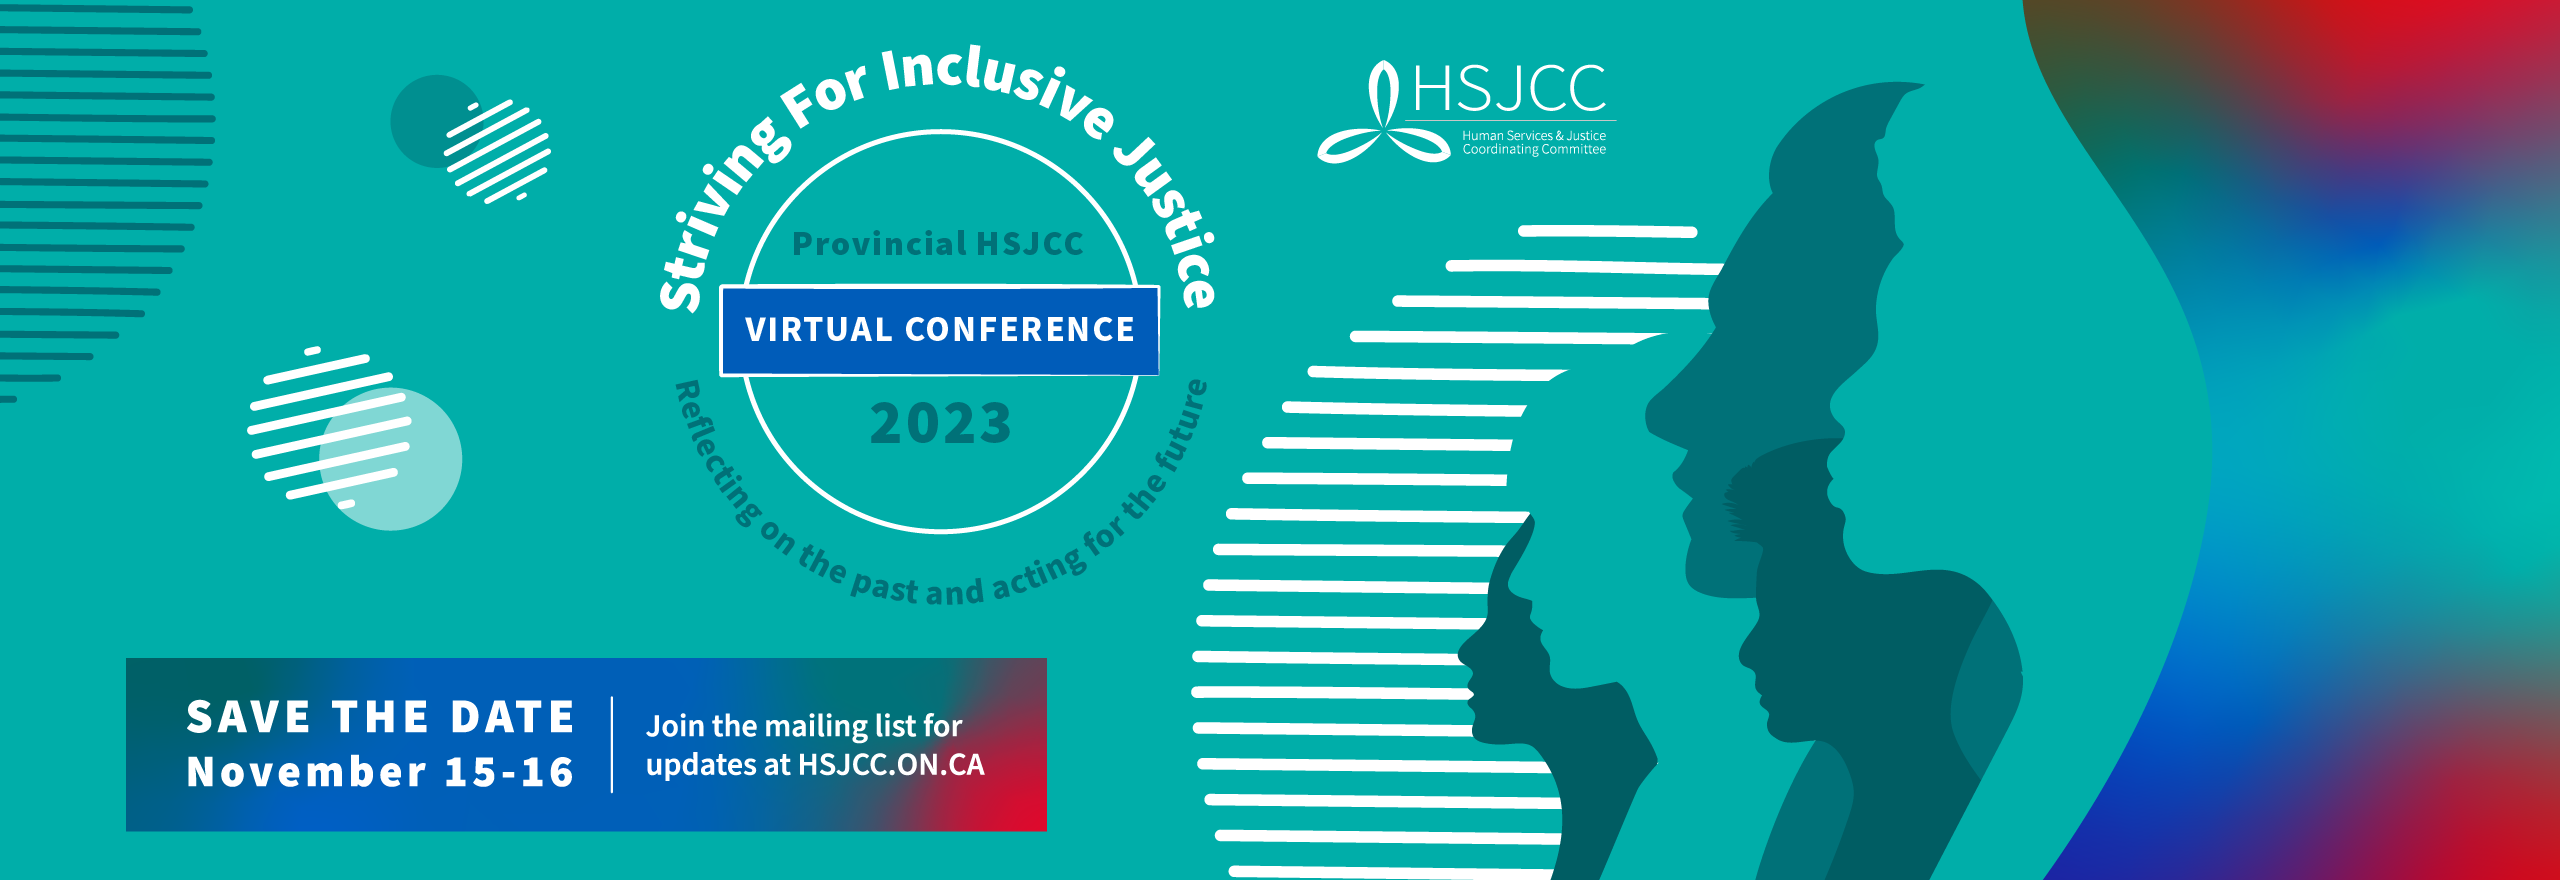 HSJCC Conference Save the Date Poster